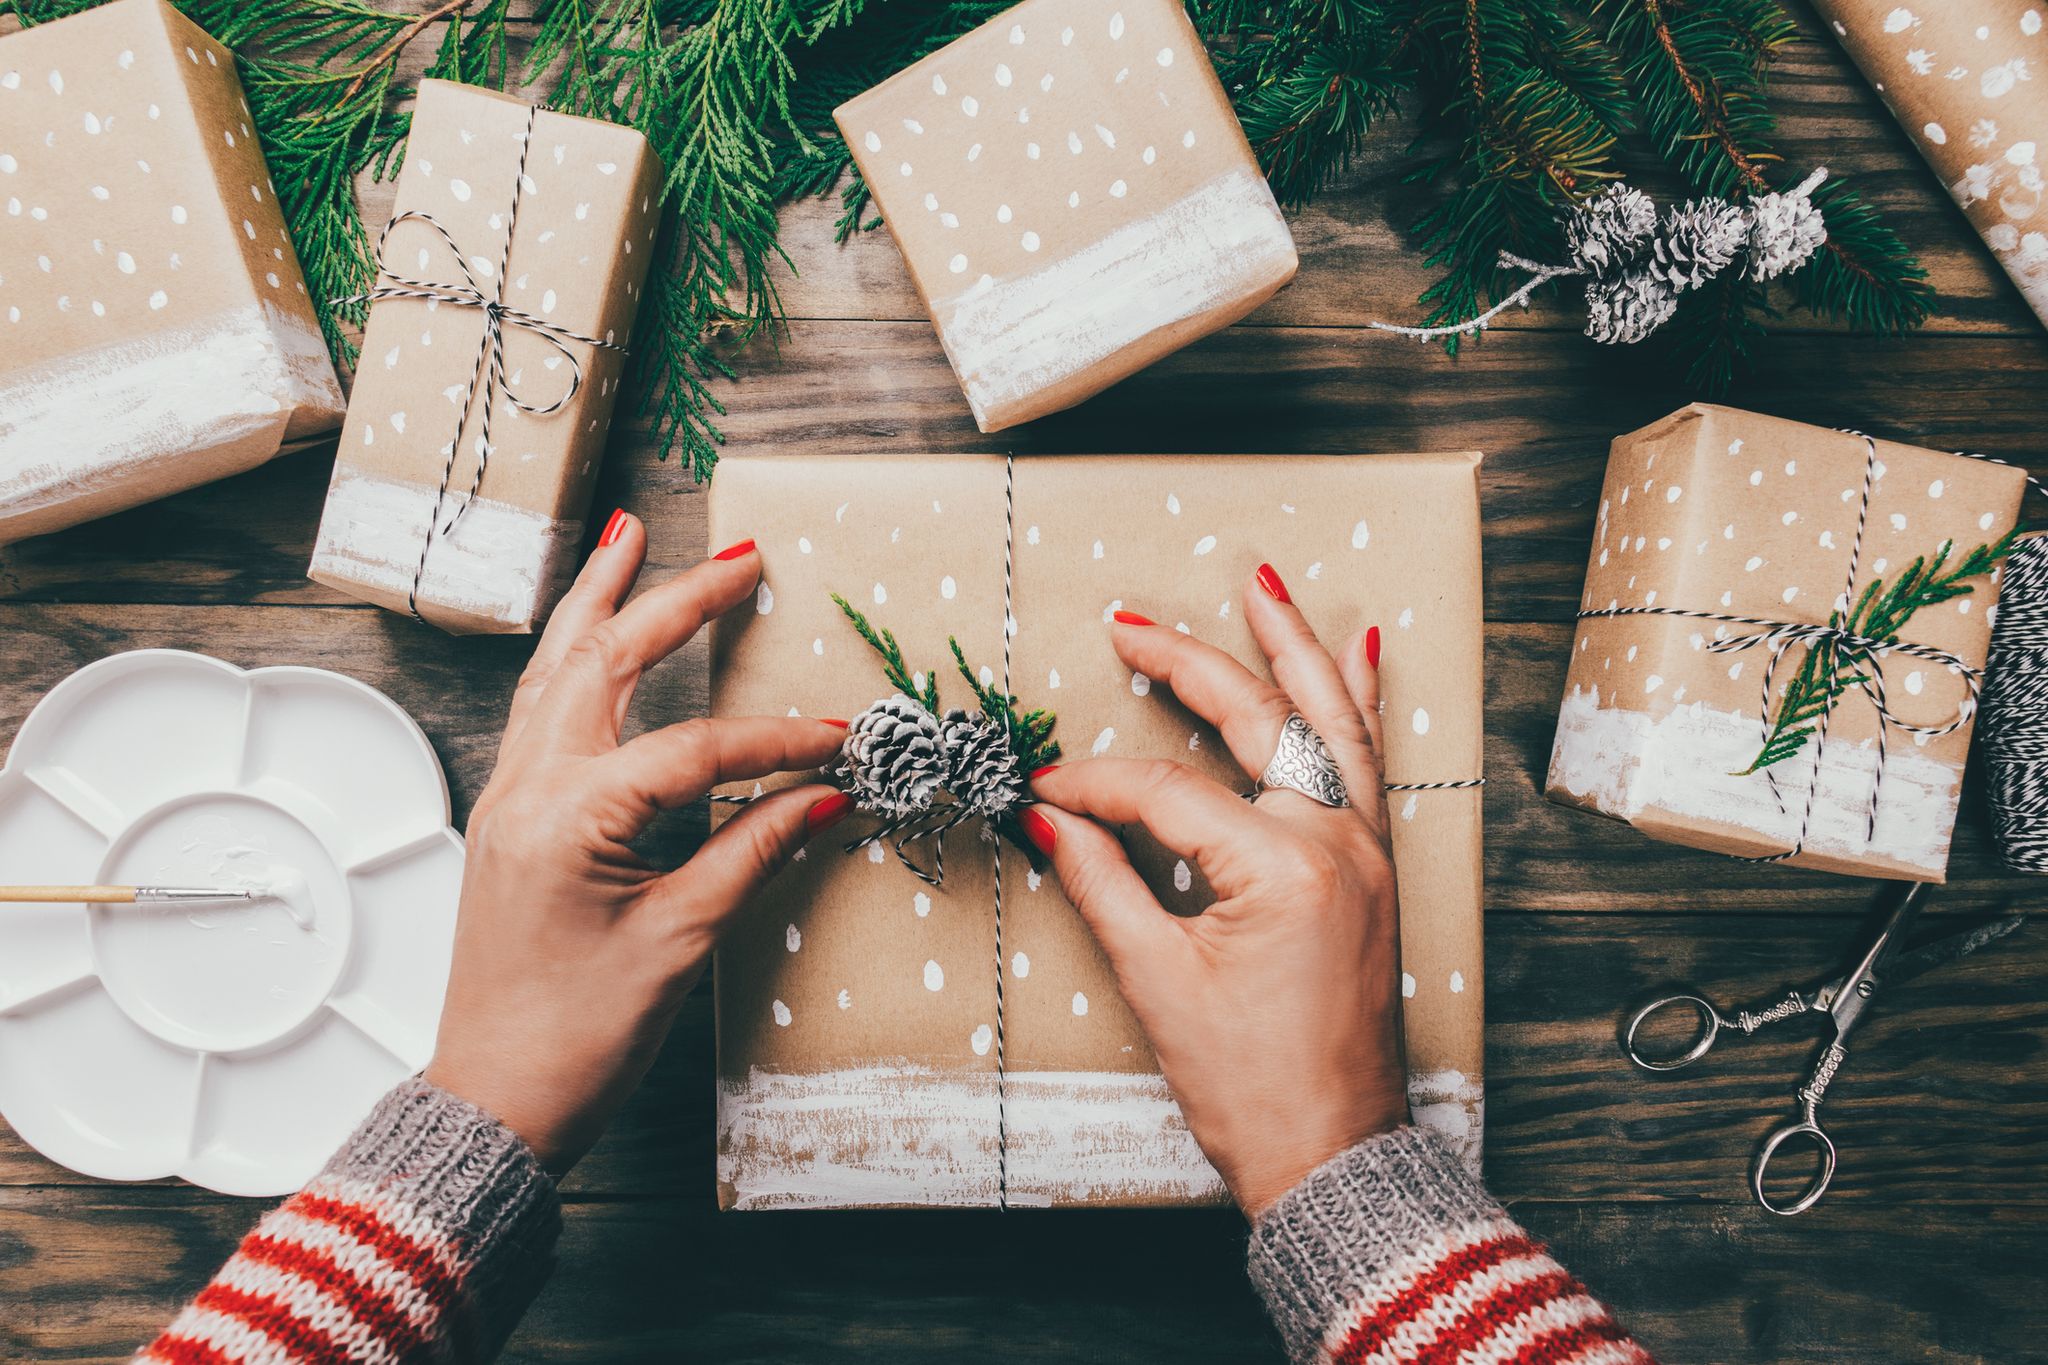 8 easy Christmas craft ideas to get you in the festive spirit